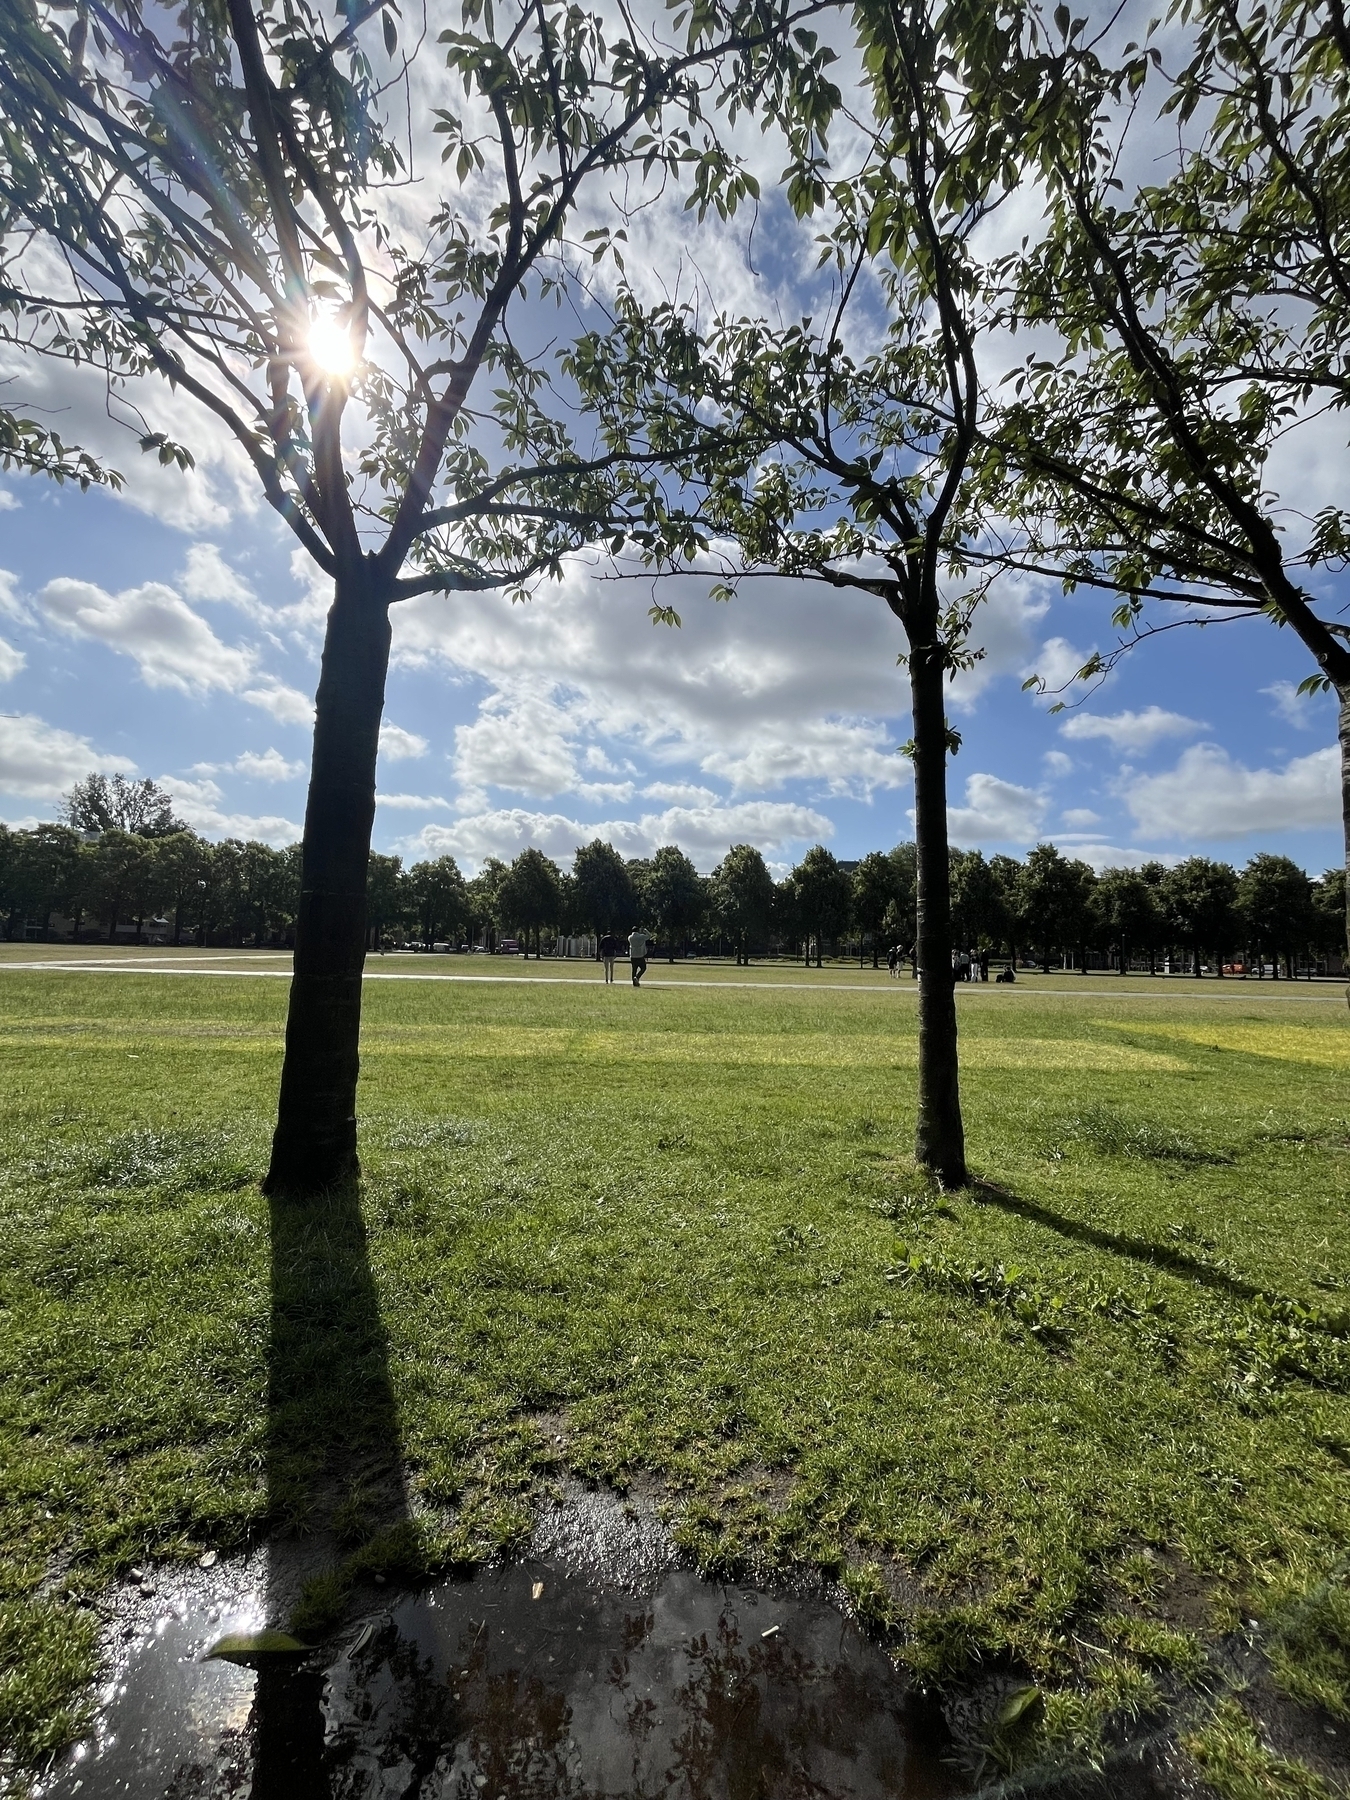 Trees cast long shadows on a sunlit grassy park with a clear, partly cloudy sky and a person walking in the distance.